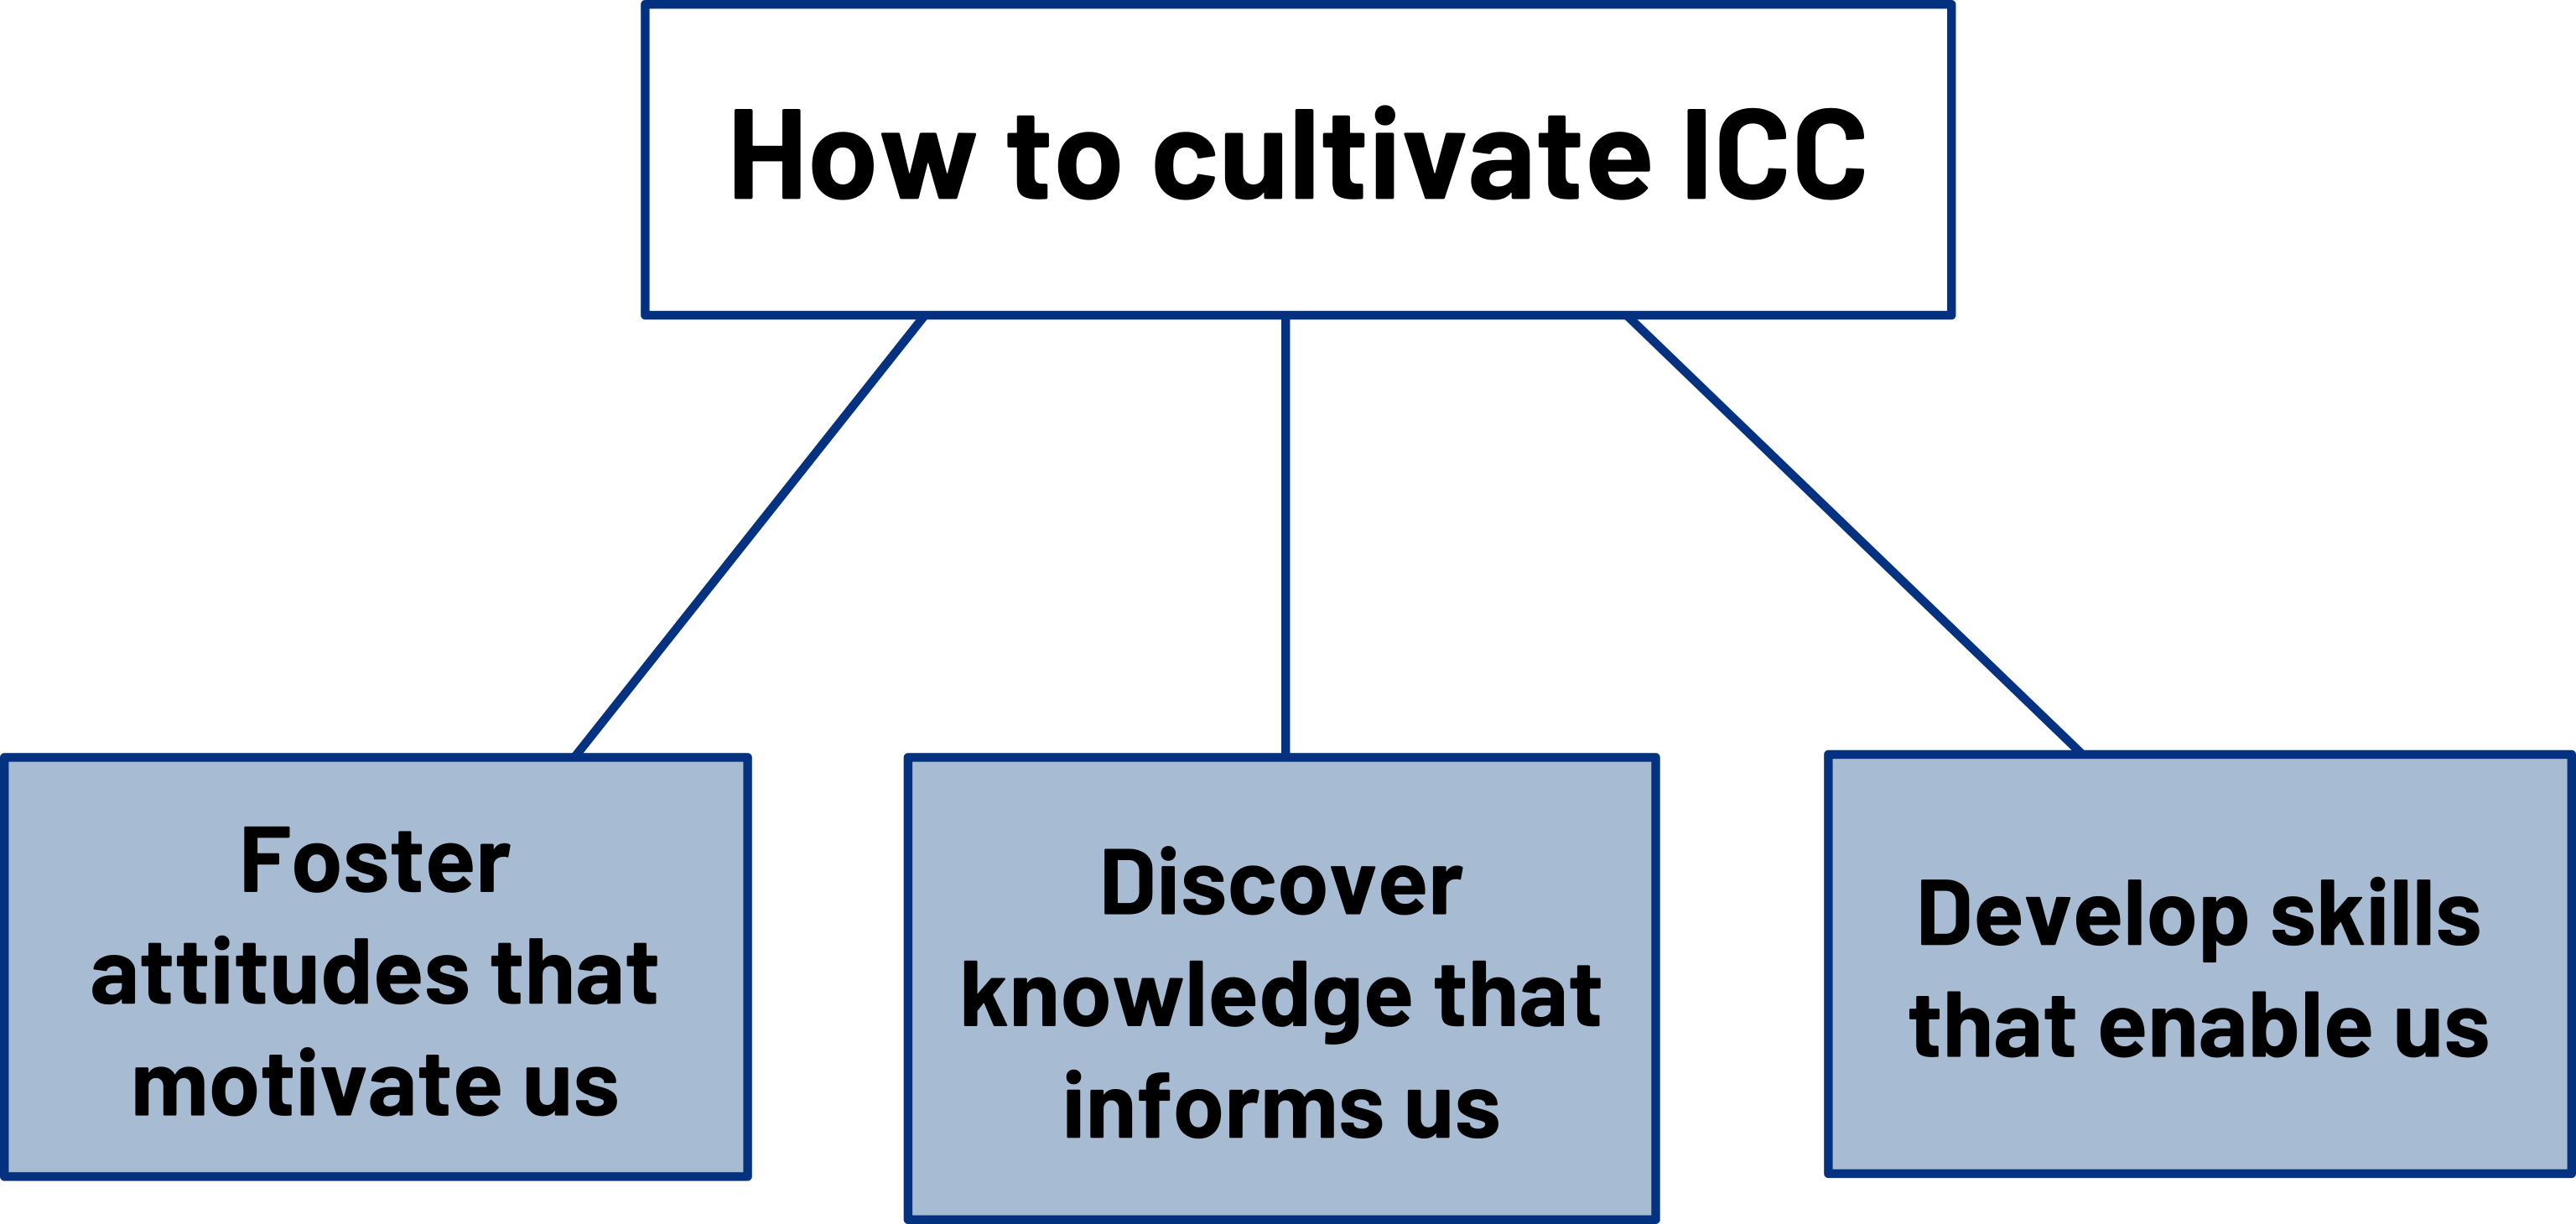 How to cultivate ICC: foster attitudes that motivate us, discover knowledge that informs us, develop skills that enable us